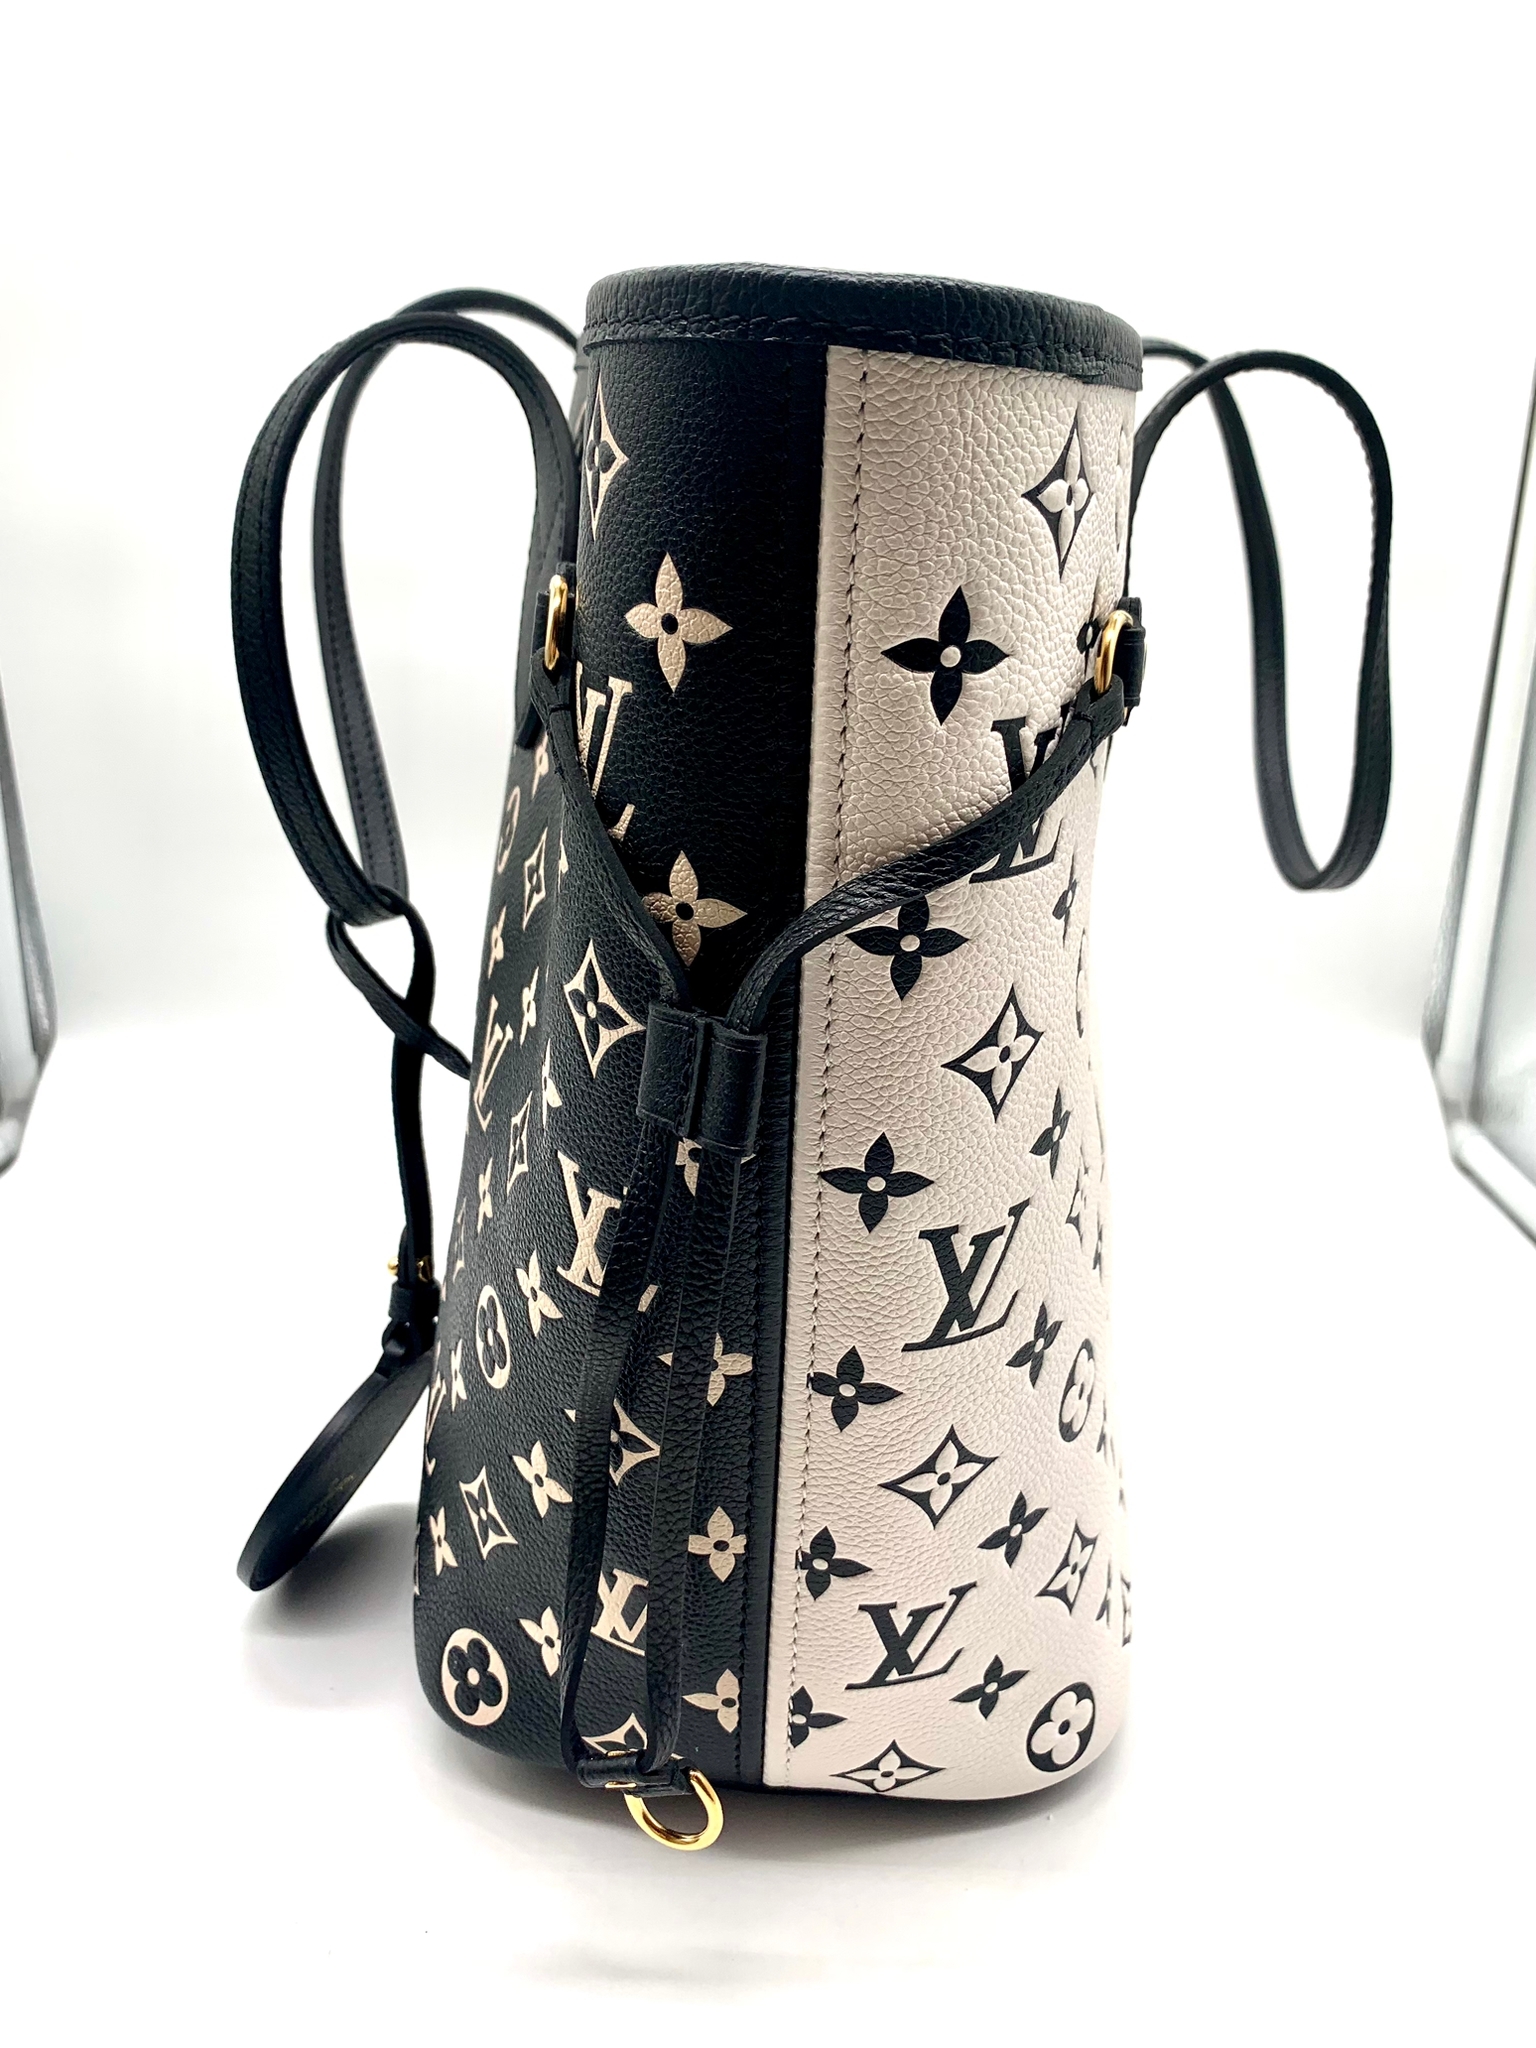 LOUIS VUITTON NEVERFULL LIMITED EDITION